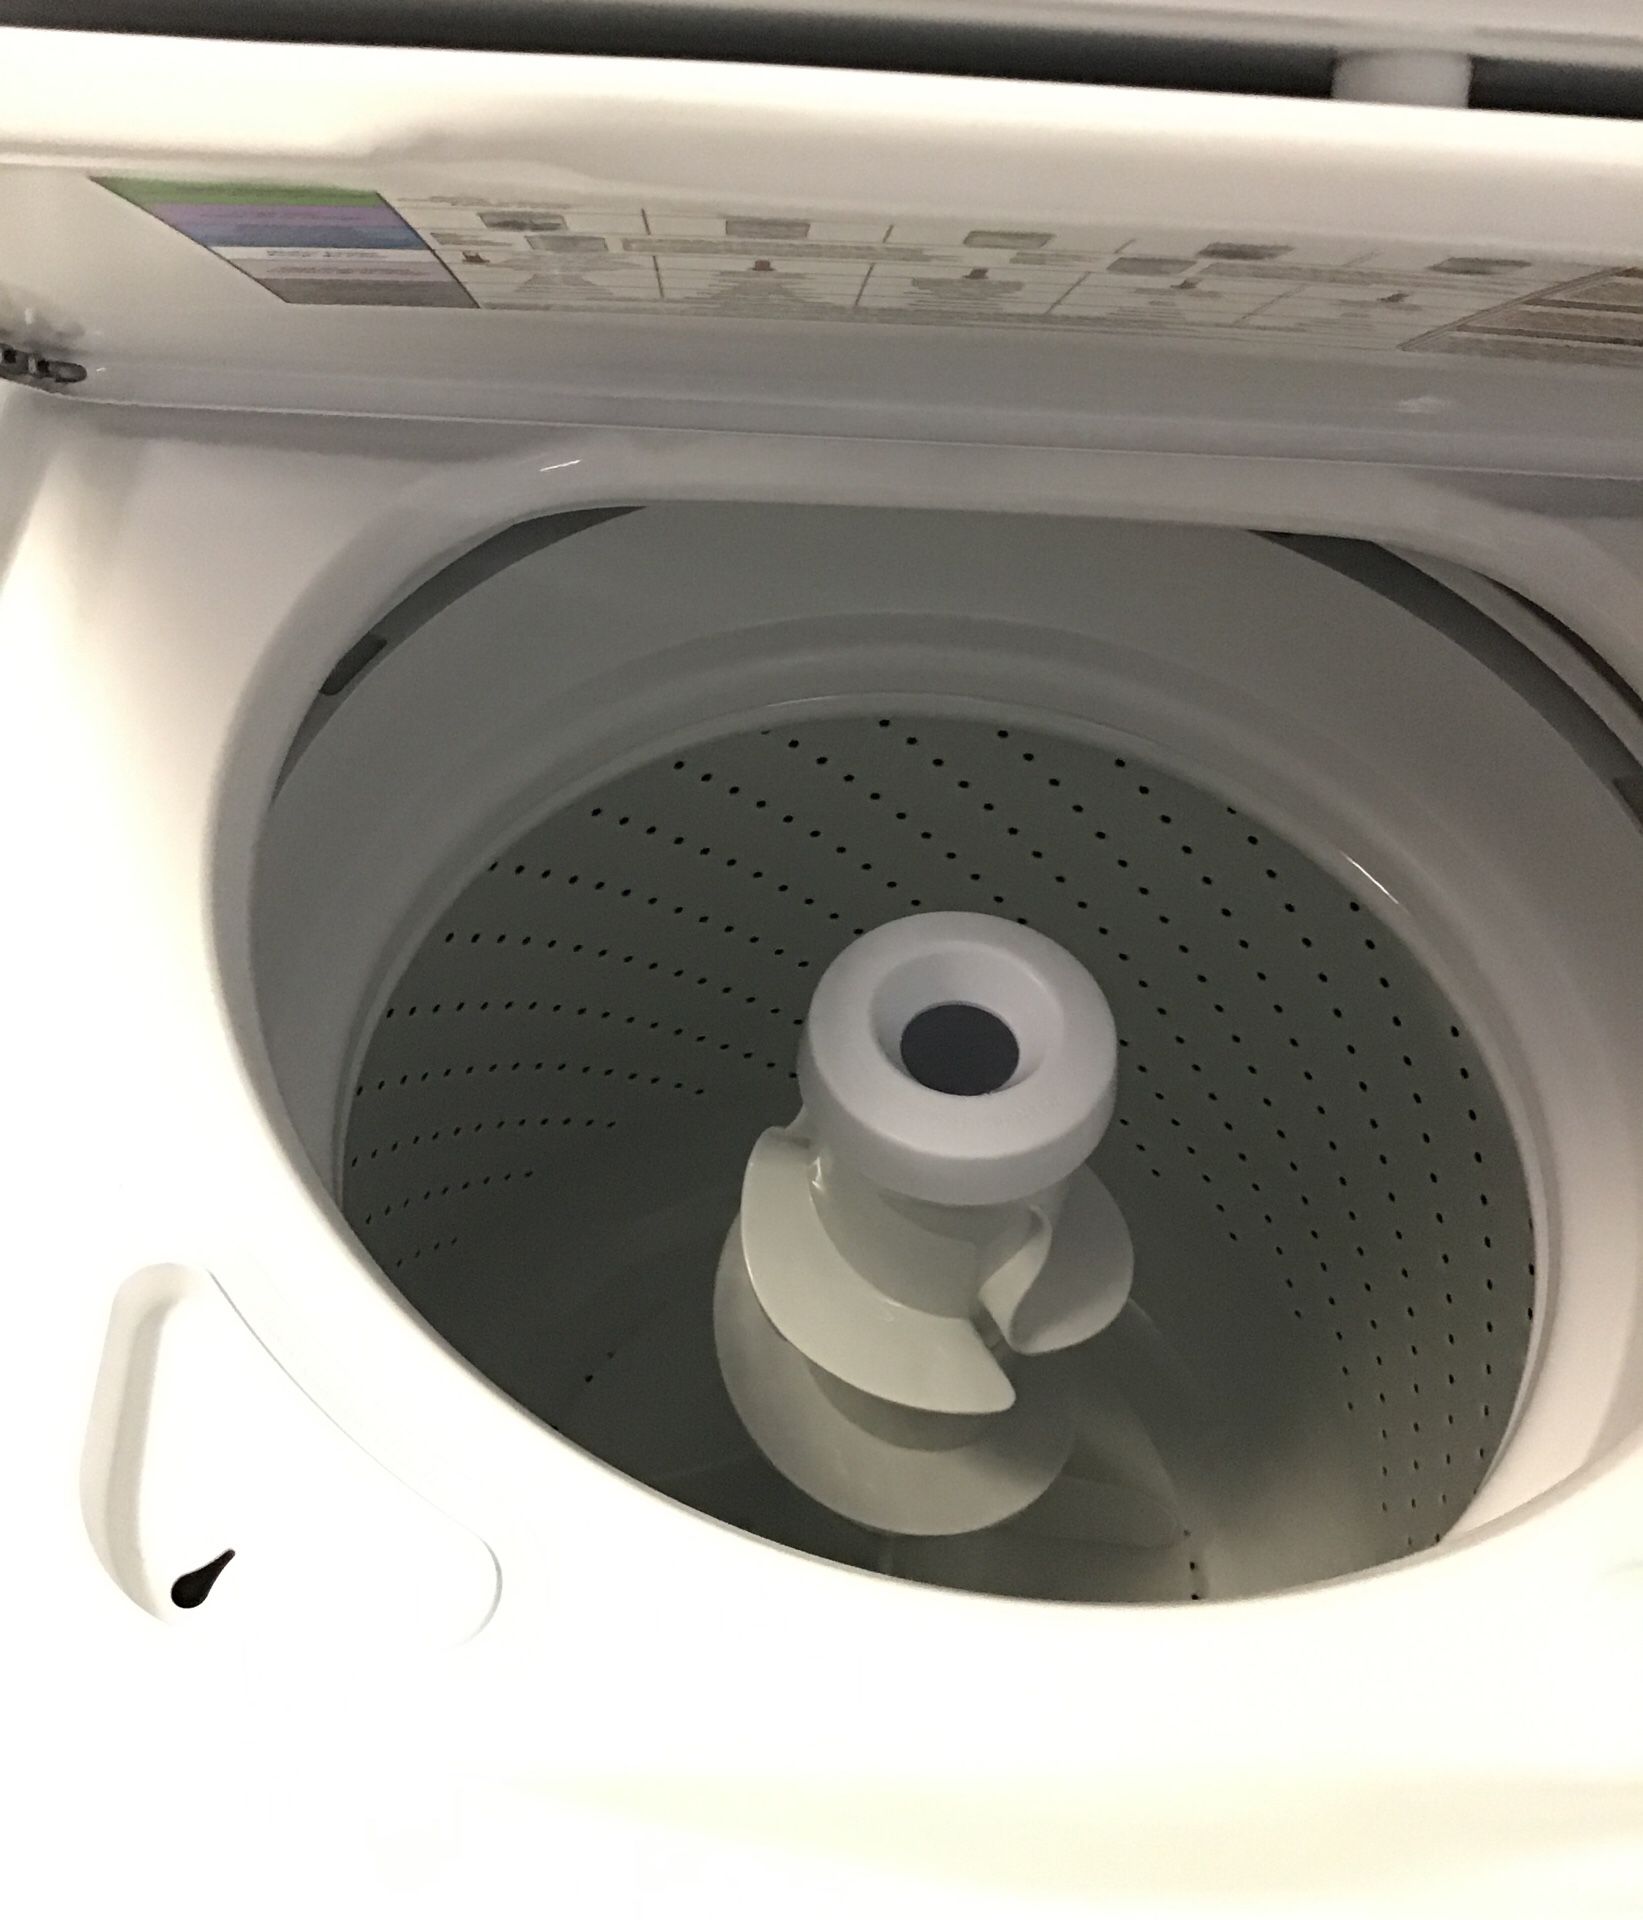 New scratch and dent whirlpool stackable washer and dryer. 1 year warranty